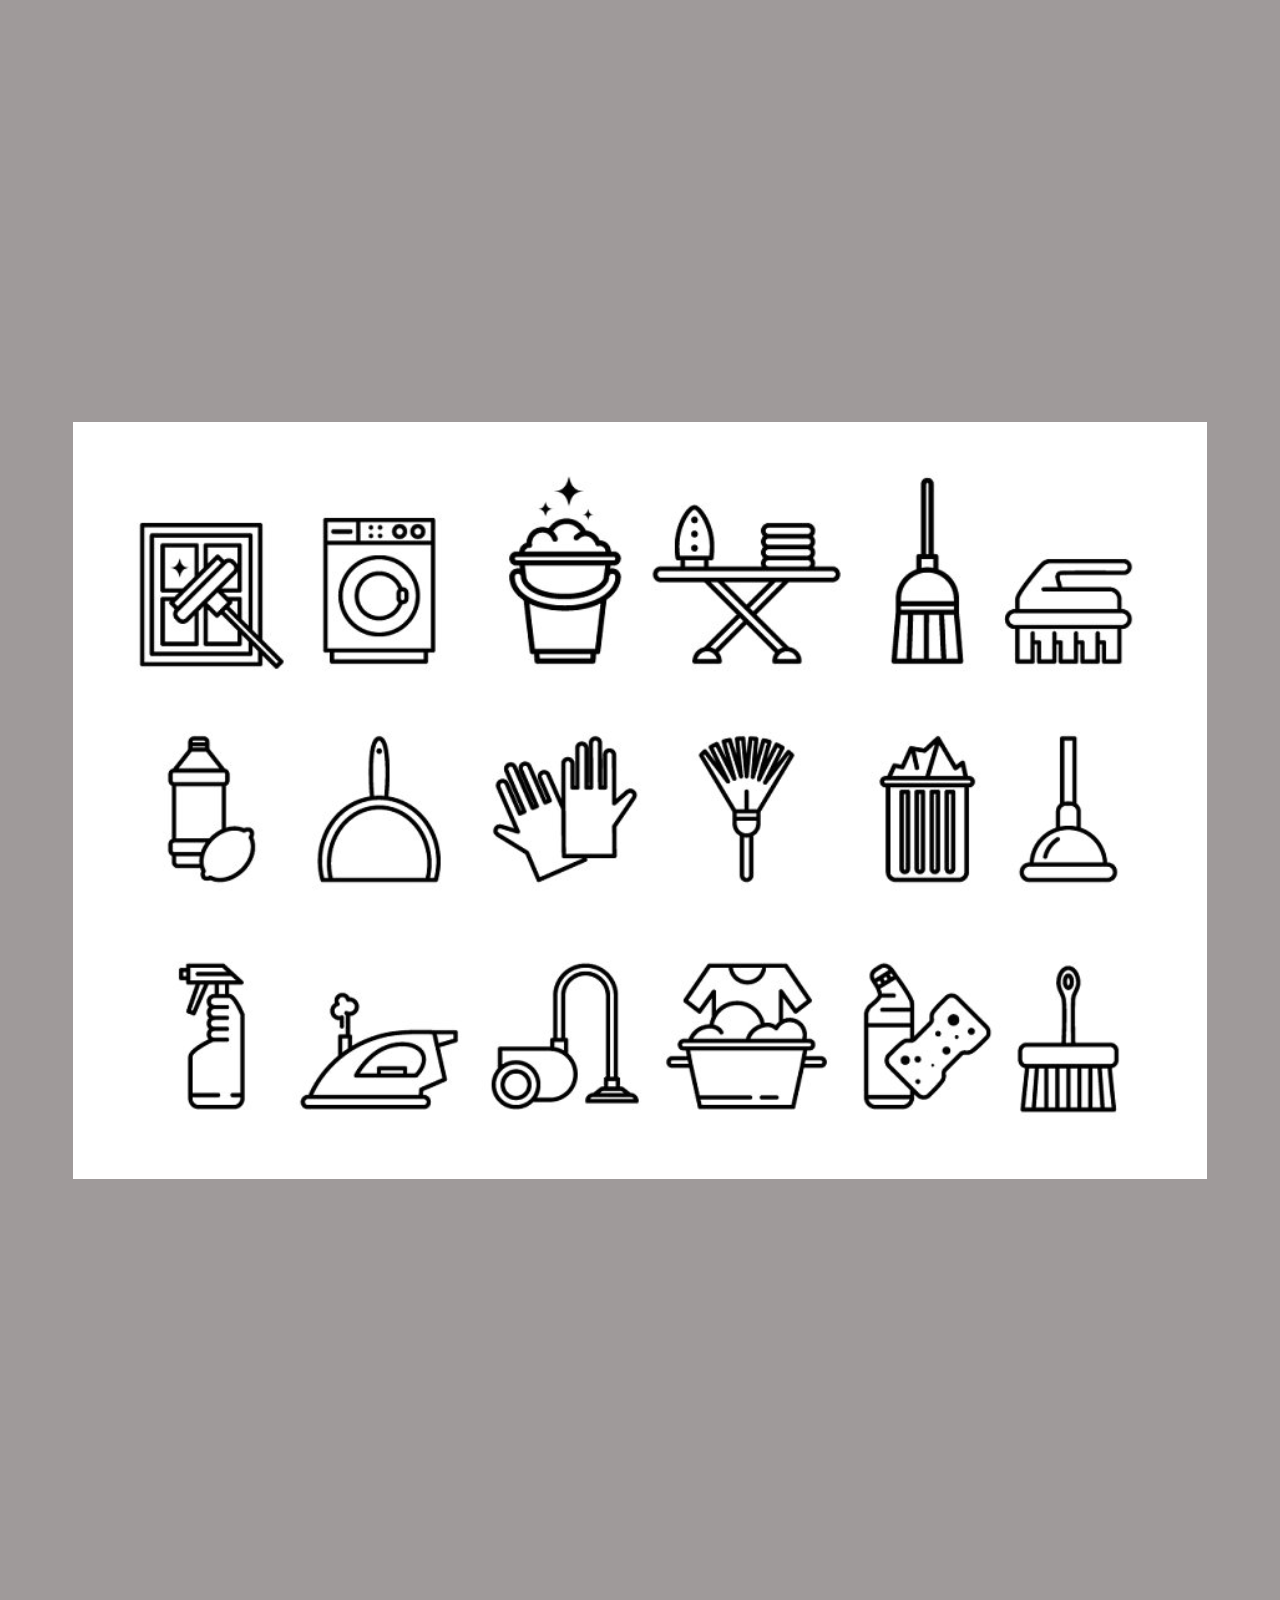 Cleaning tools icons pinterest image.